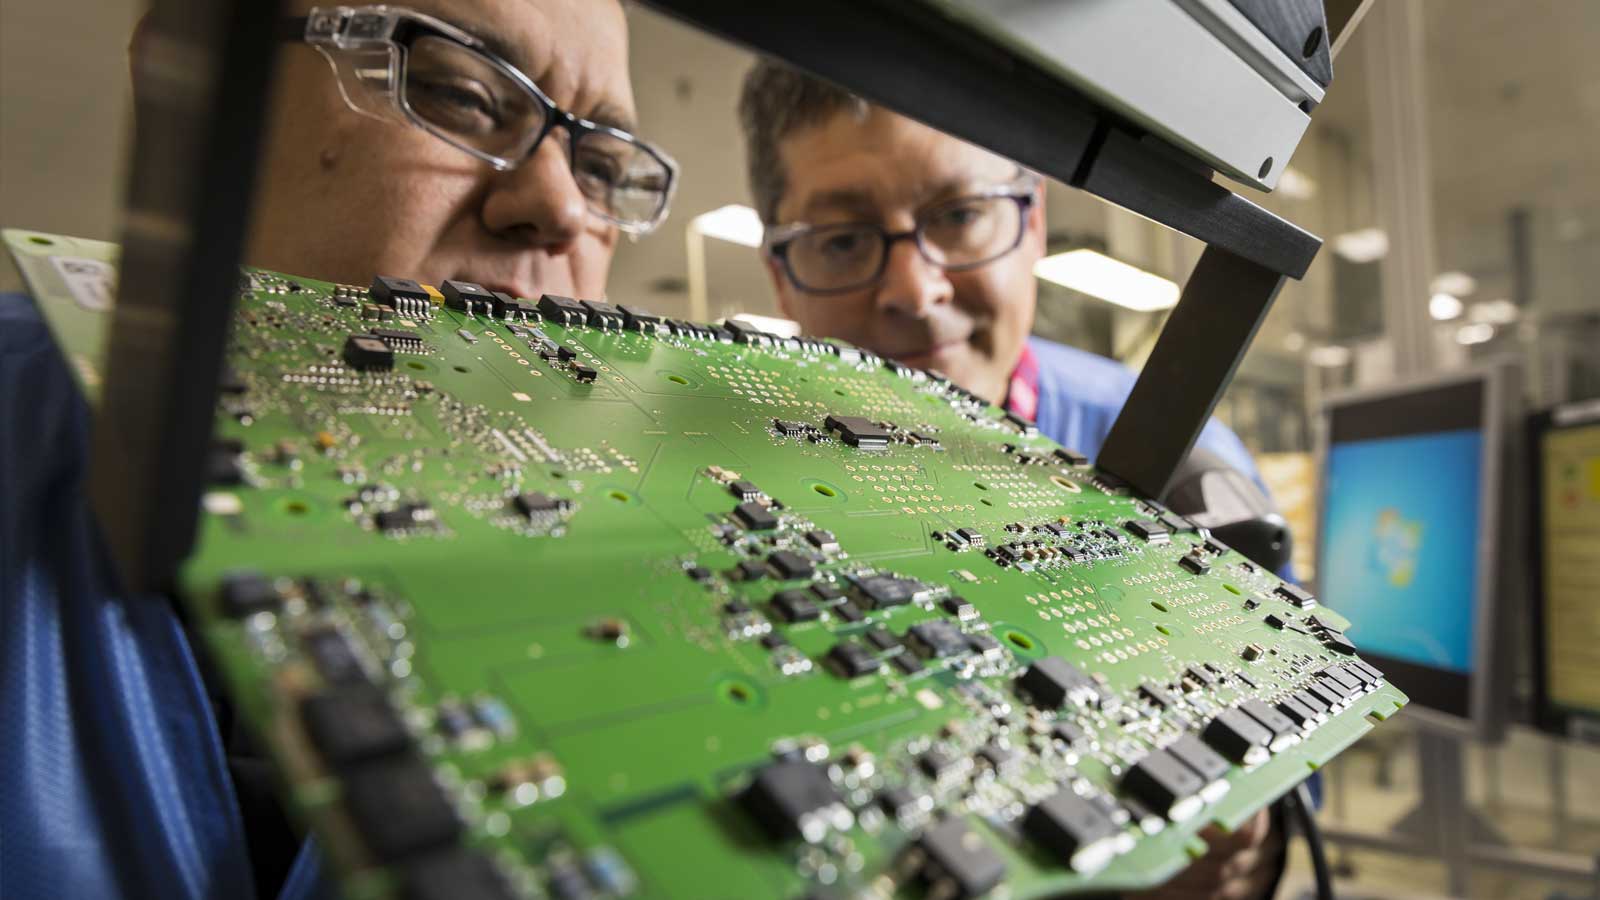 Two men working on a microprocessor